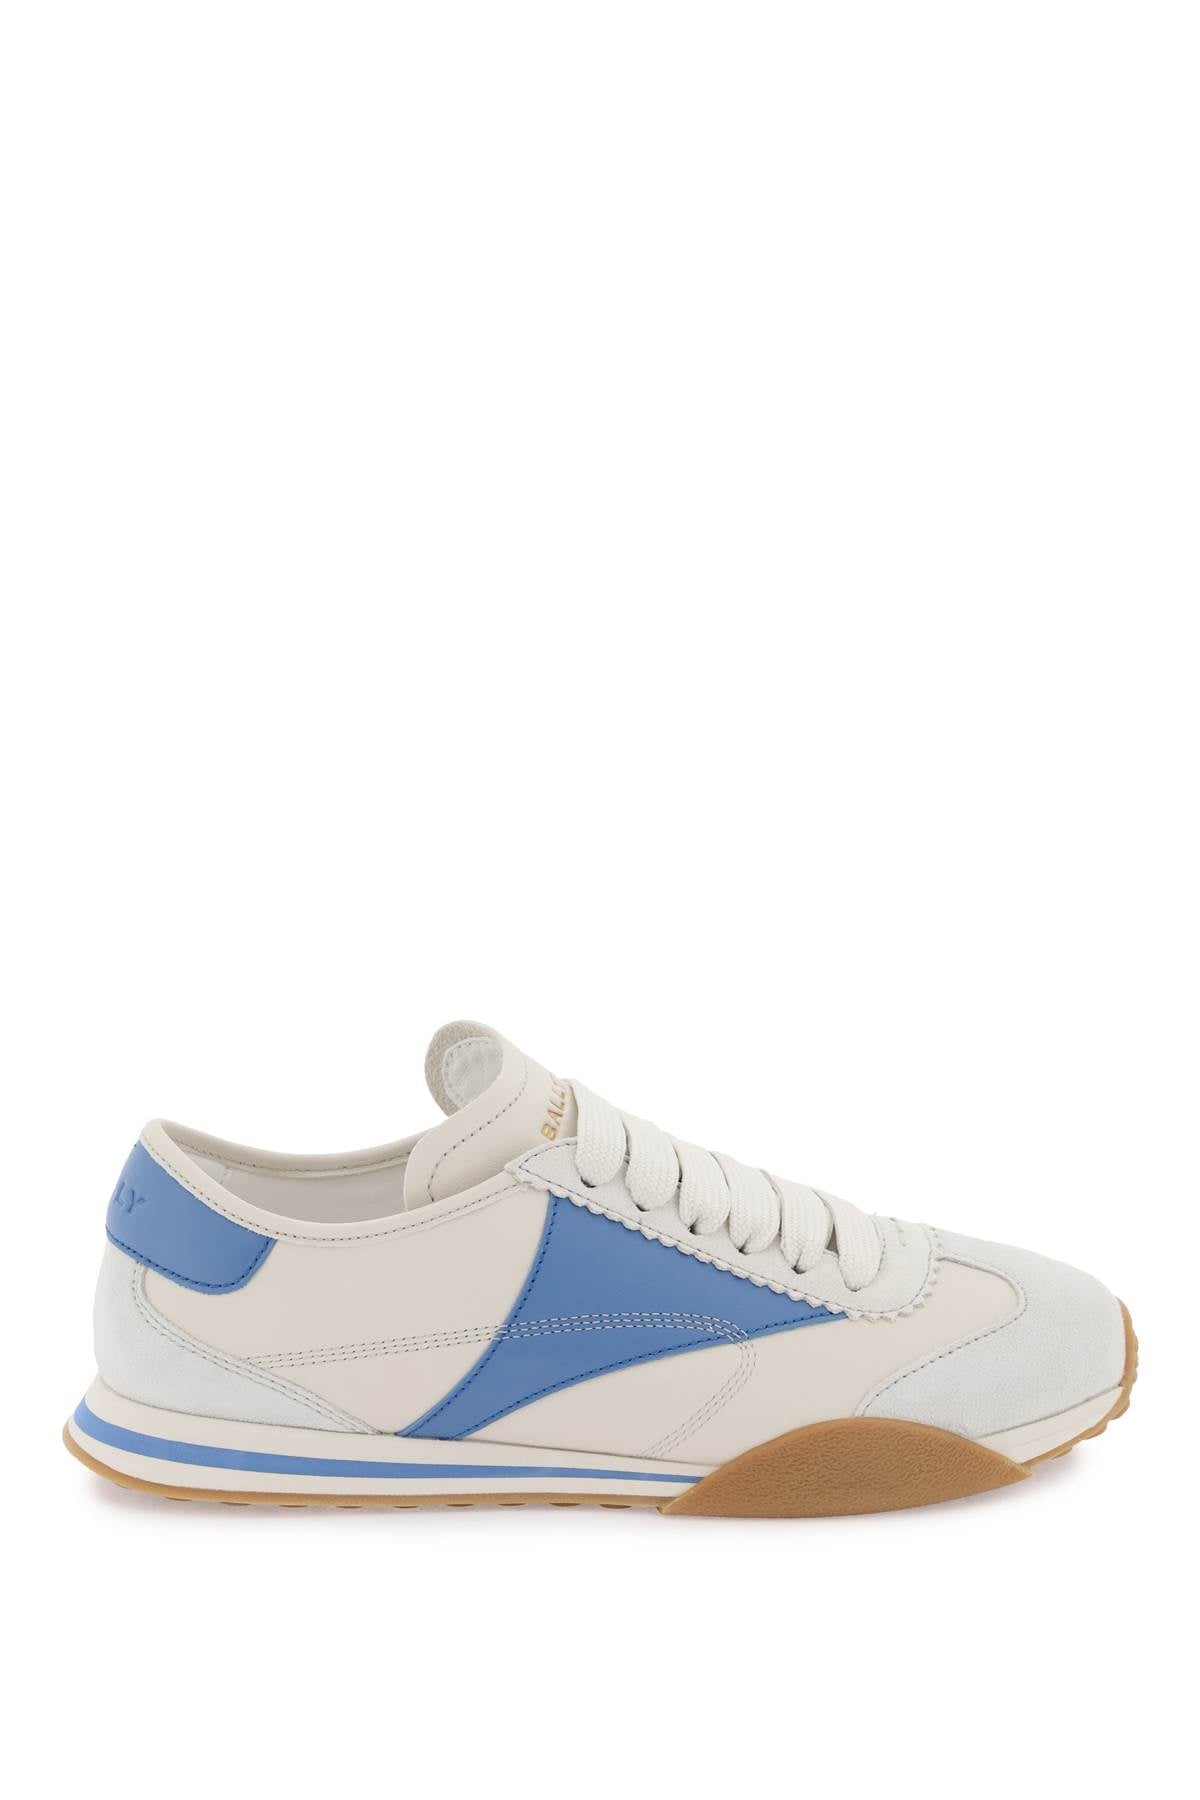 Bally leather sonney sneakers-0